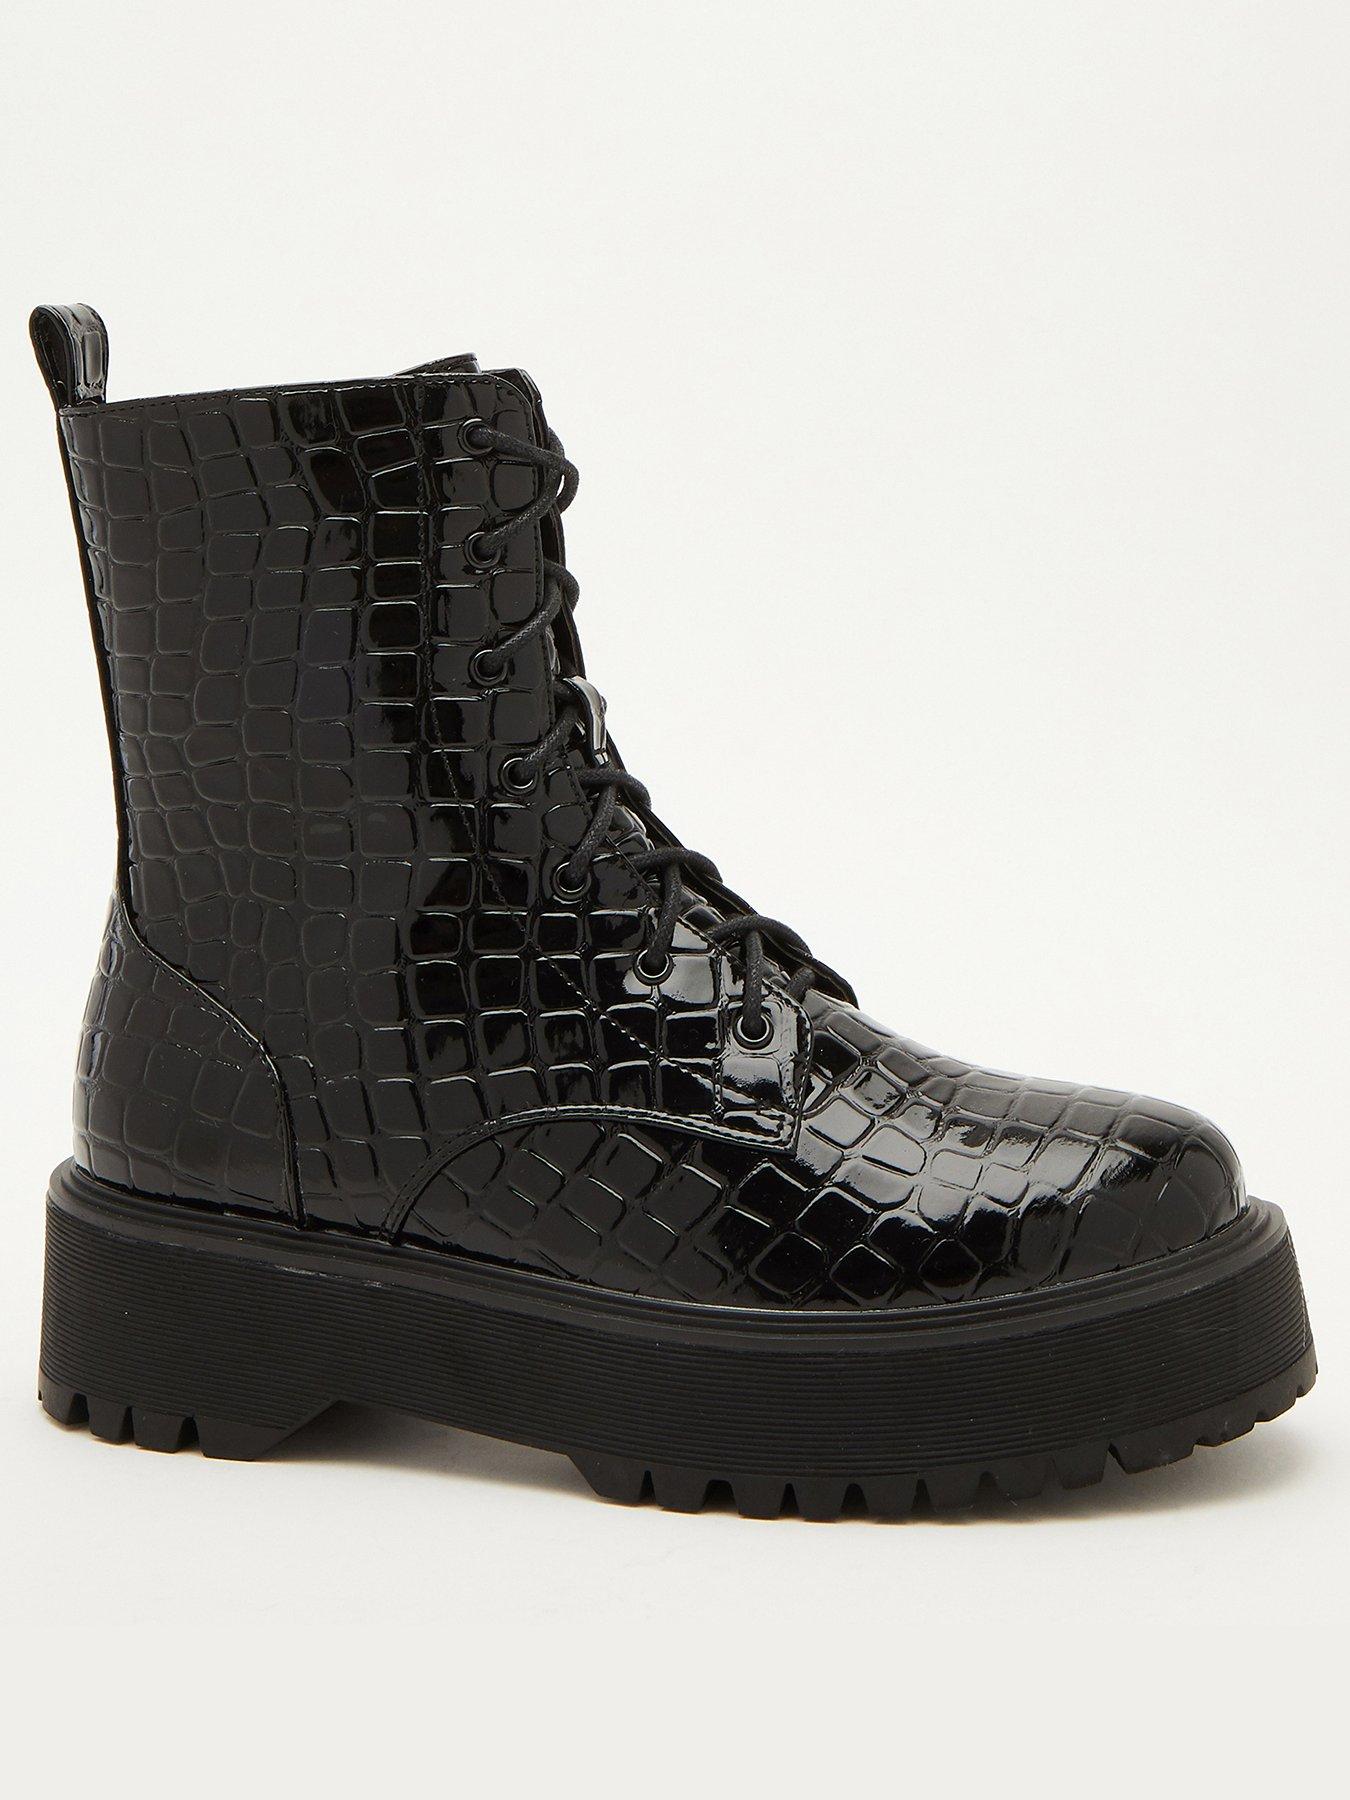 Shoes & boots Crocodile Lace Up Boots